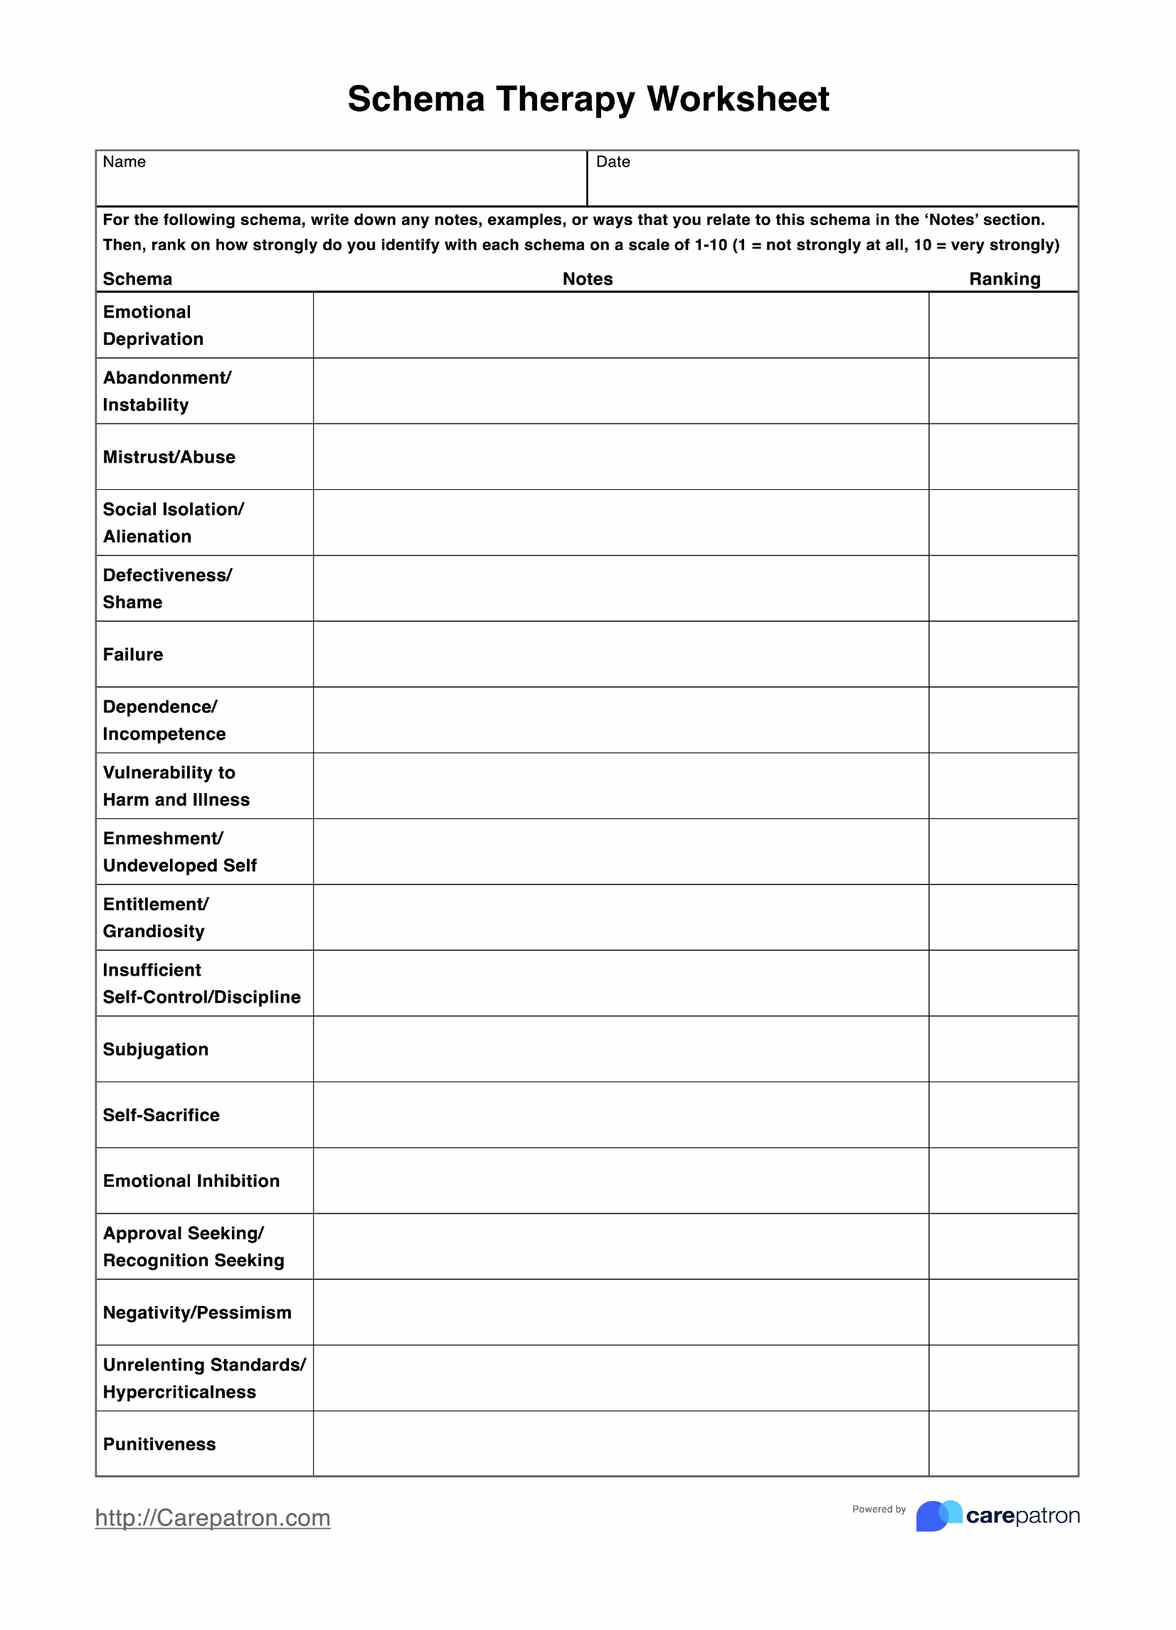 Schema Therapy Worksheets PDF Example